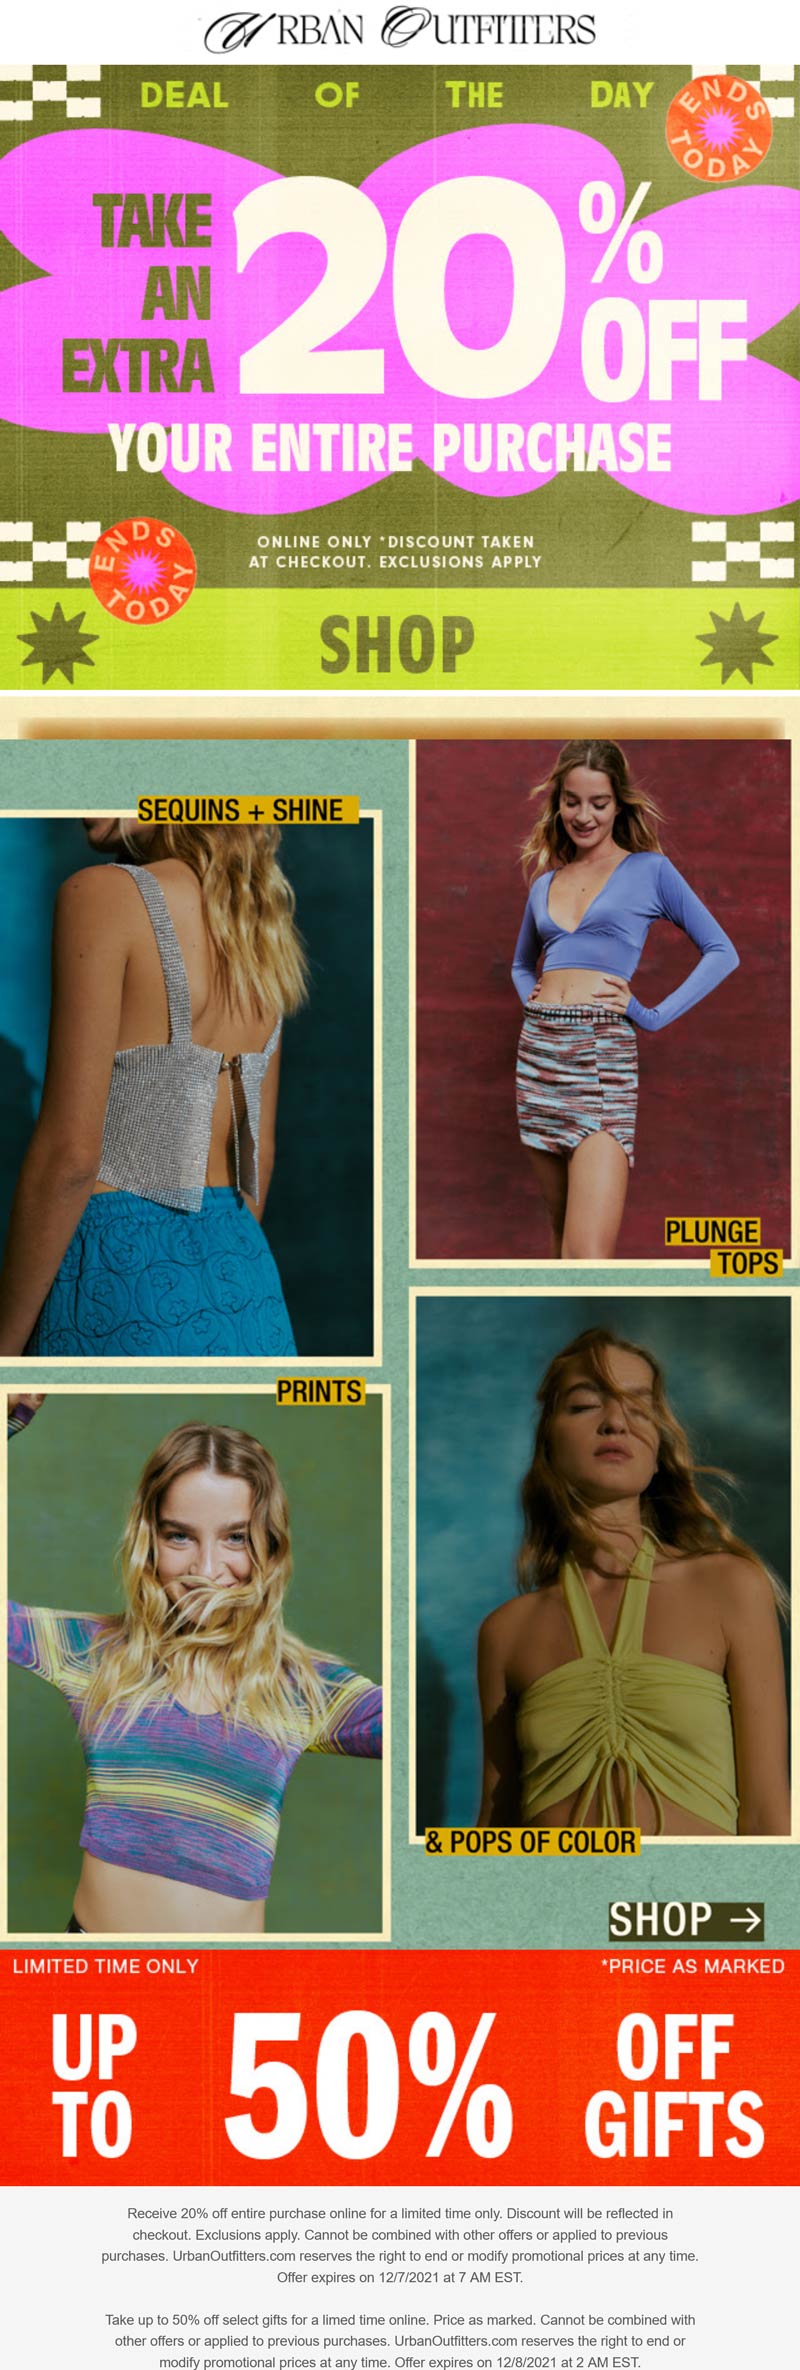 Urban Outfitters coupons & promo code for [November 2022]